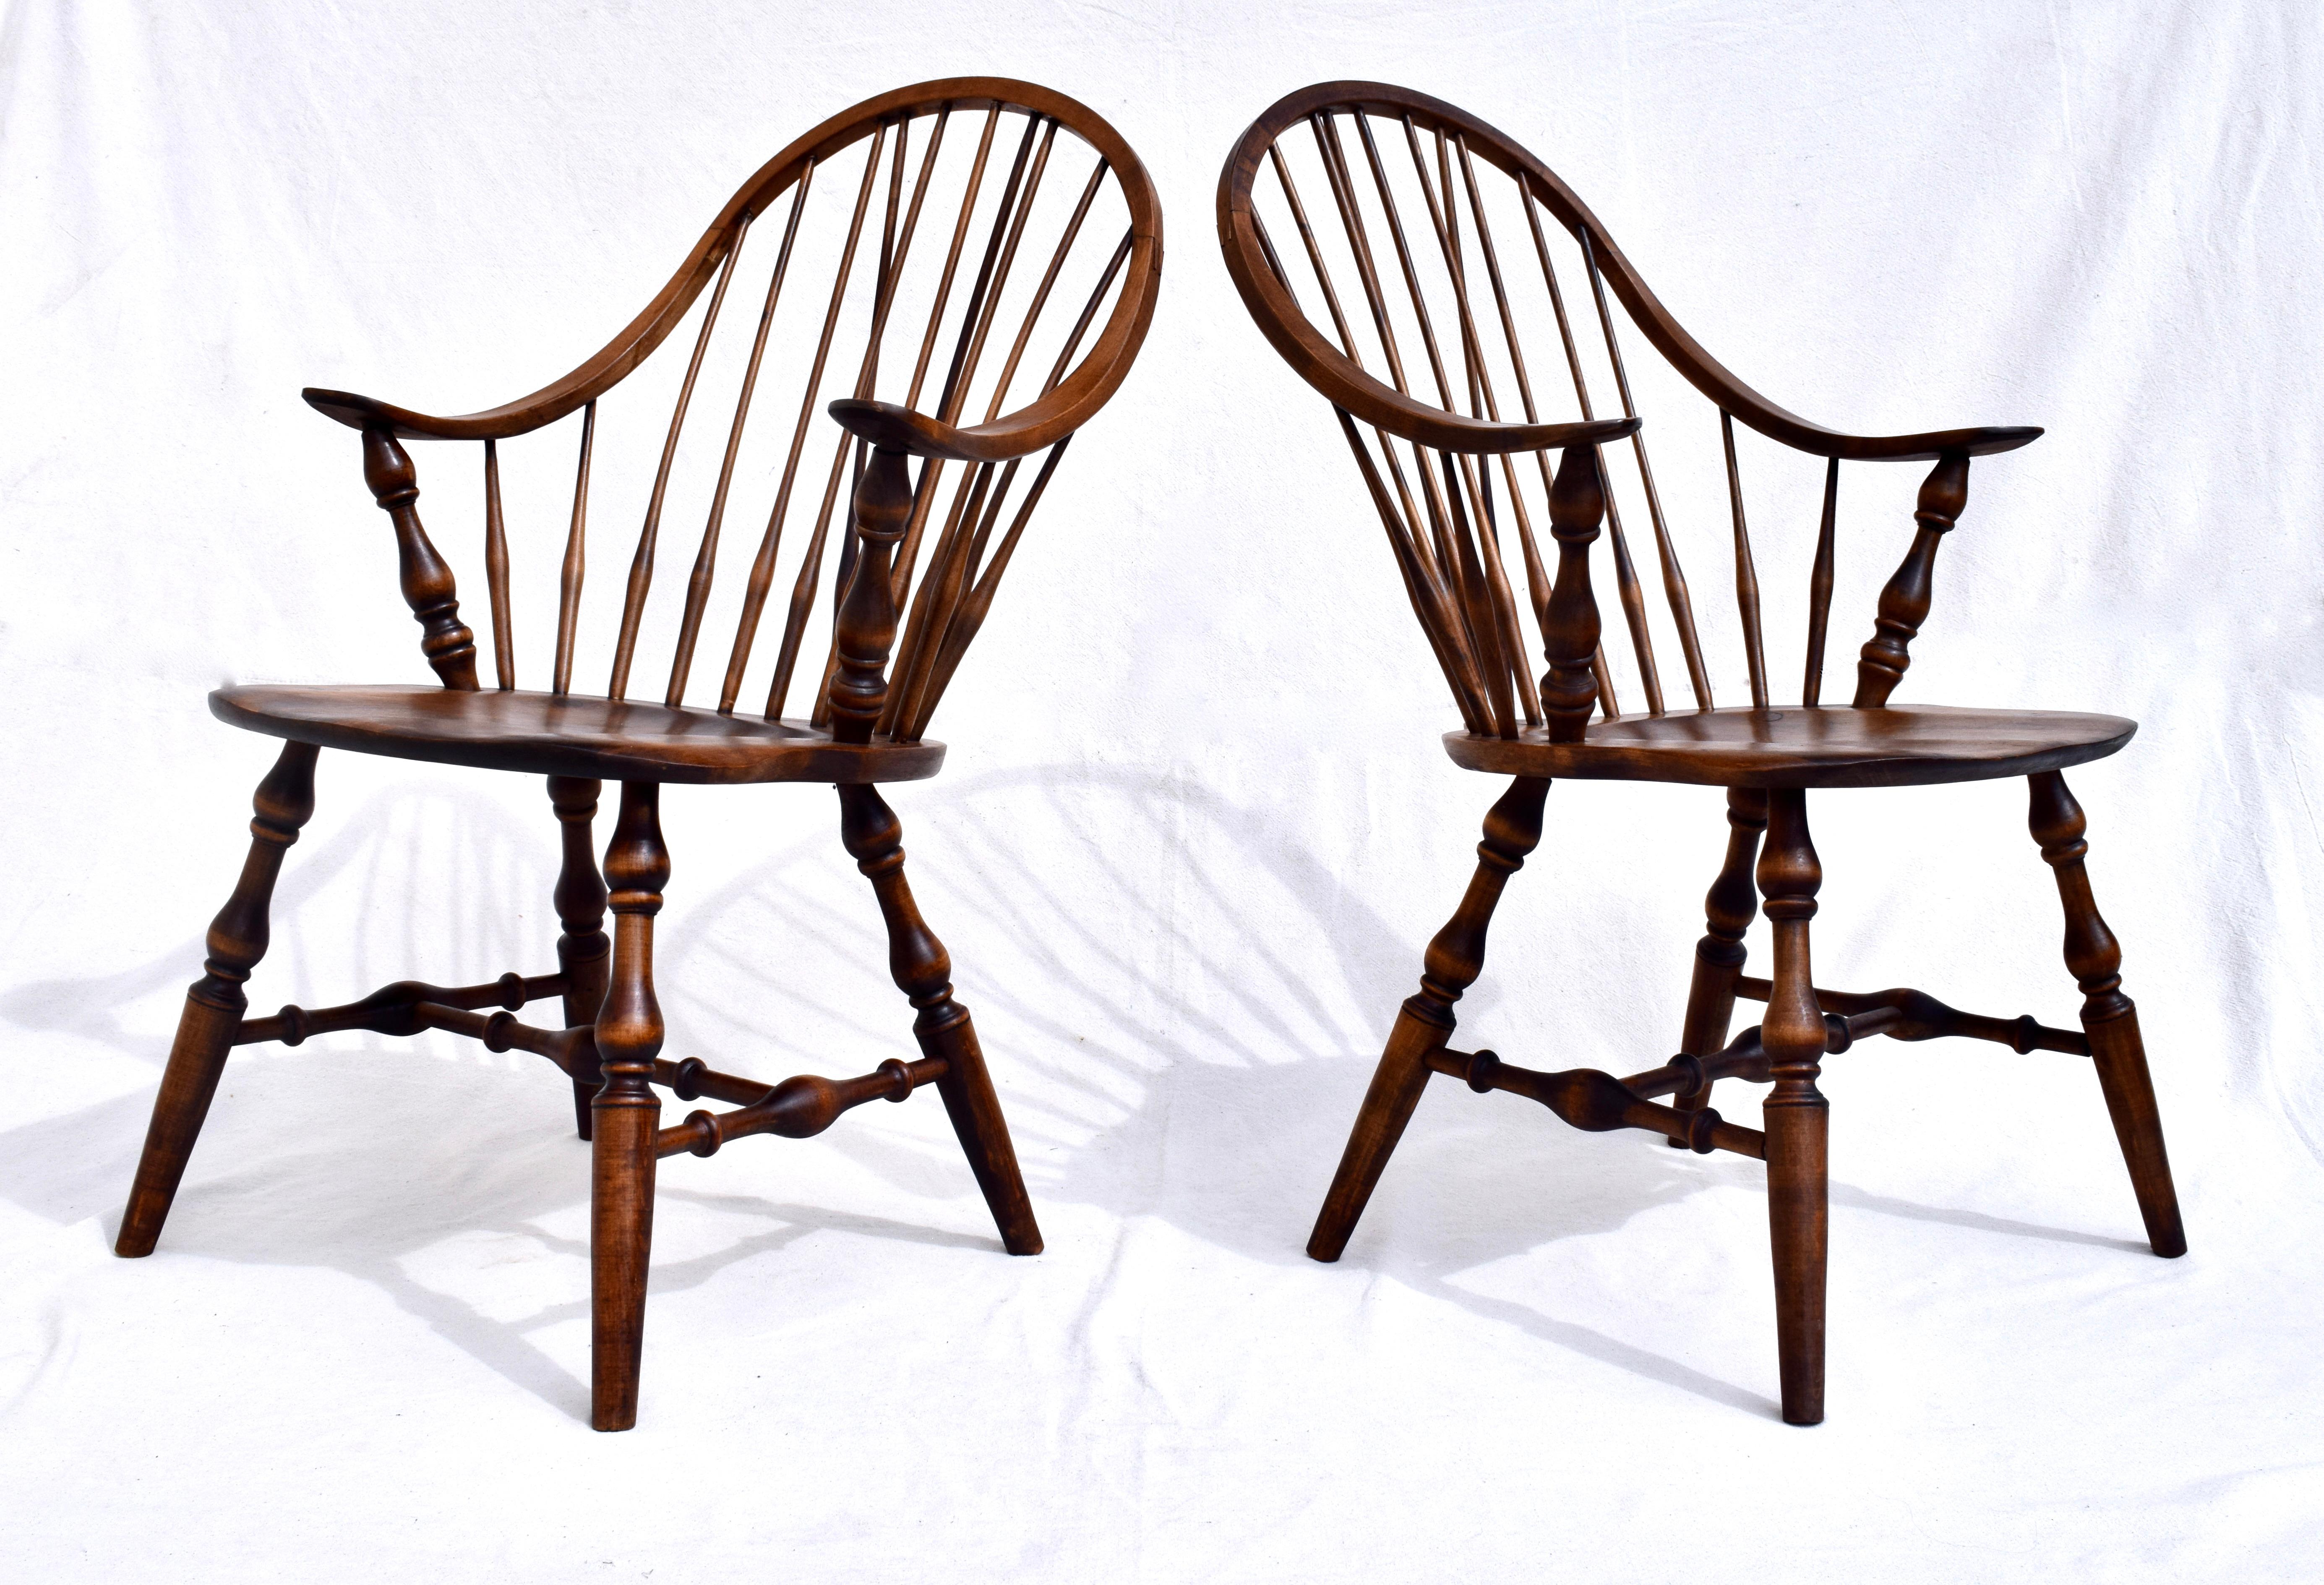 1950s Hale of Vermont Prospers continuous bow Windsor spindle back dining chairs of fine hand constructed dovetailing with Mortis & Tenon joinery. This scarcely seen pair features interesting paddle like arms with turned legs & H stretcher bases.